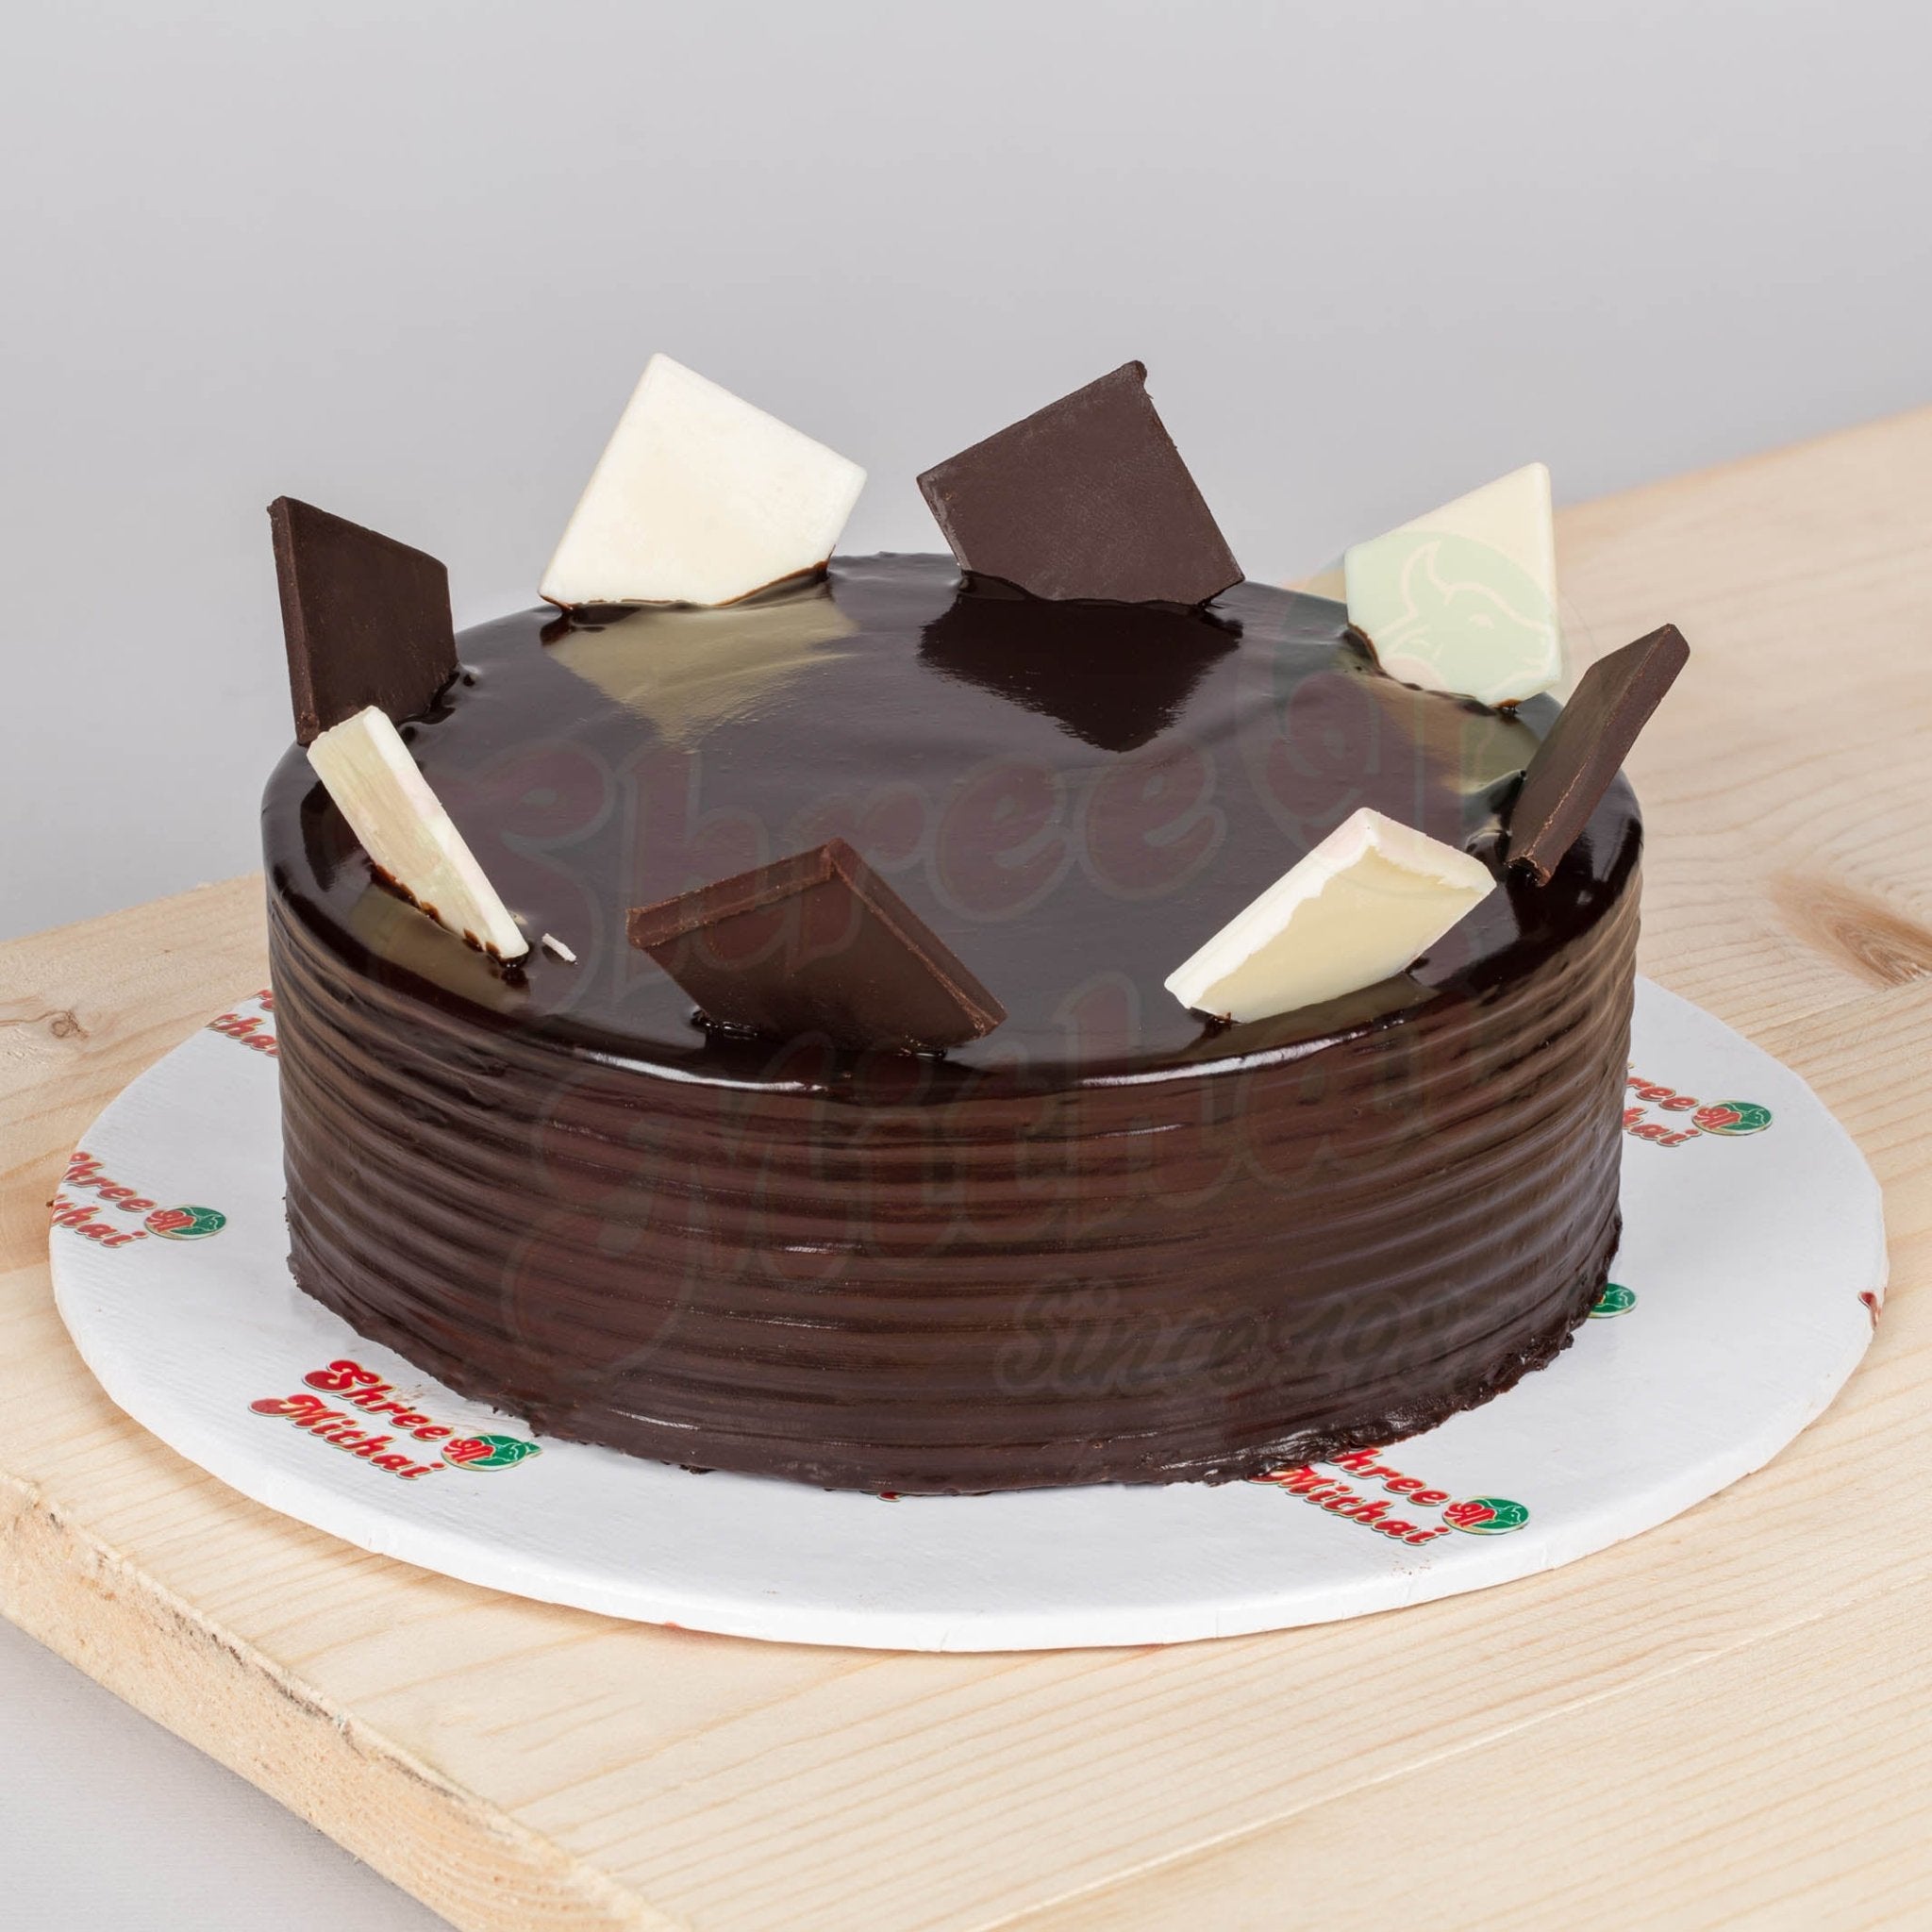 Easy Layered Chocolate Truffle Cake Recipe From a Box - Cupcakes and Cutlery